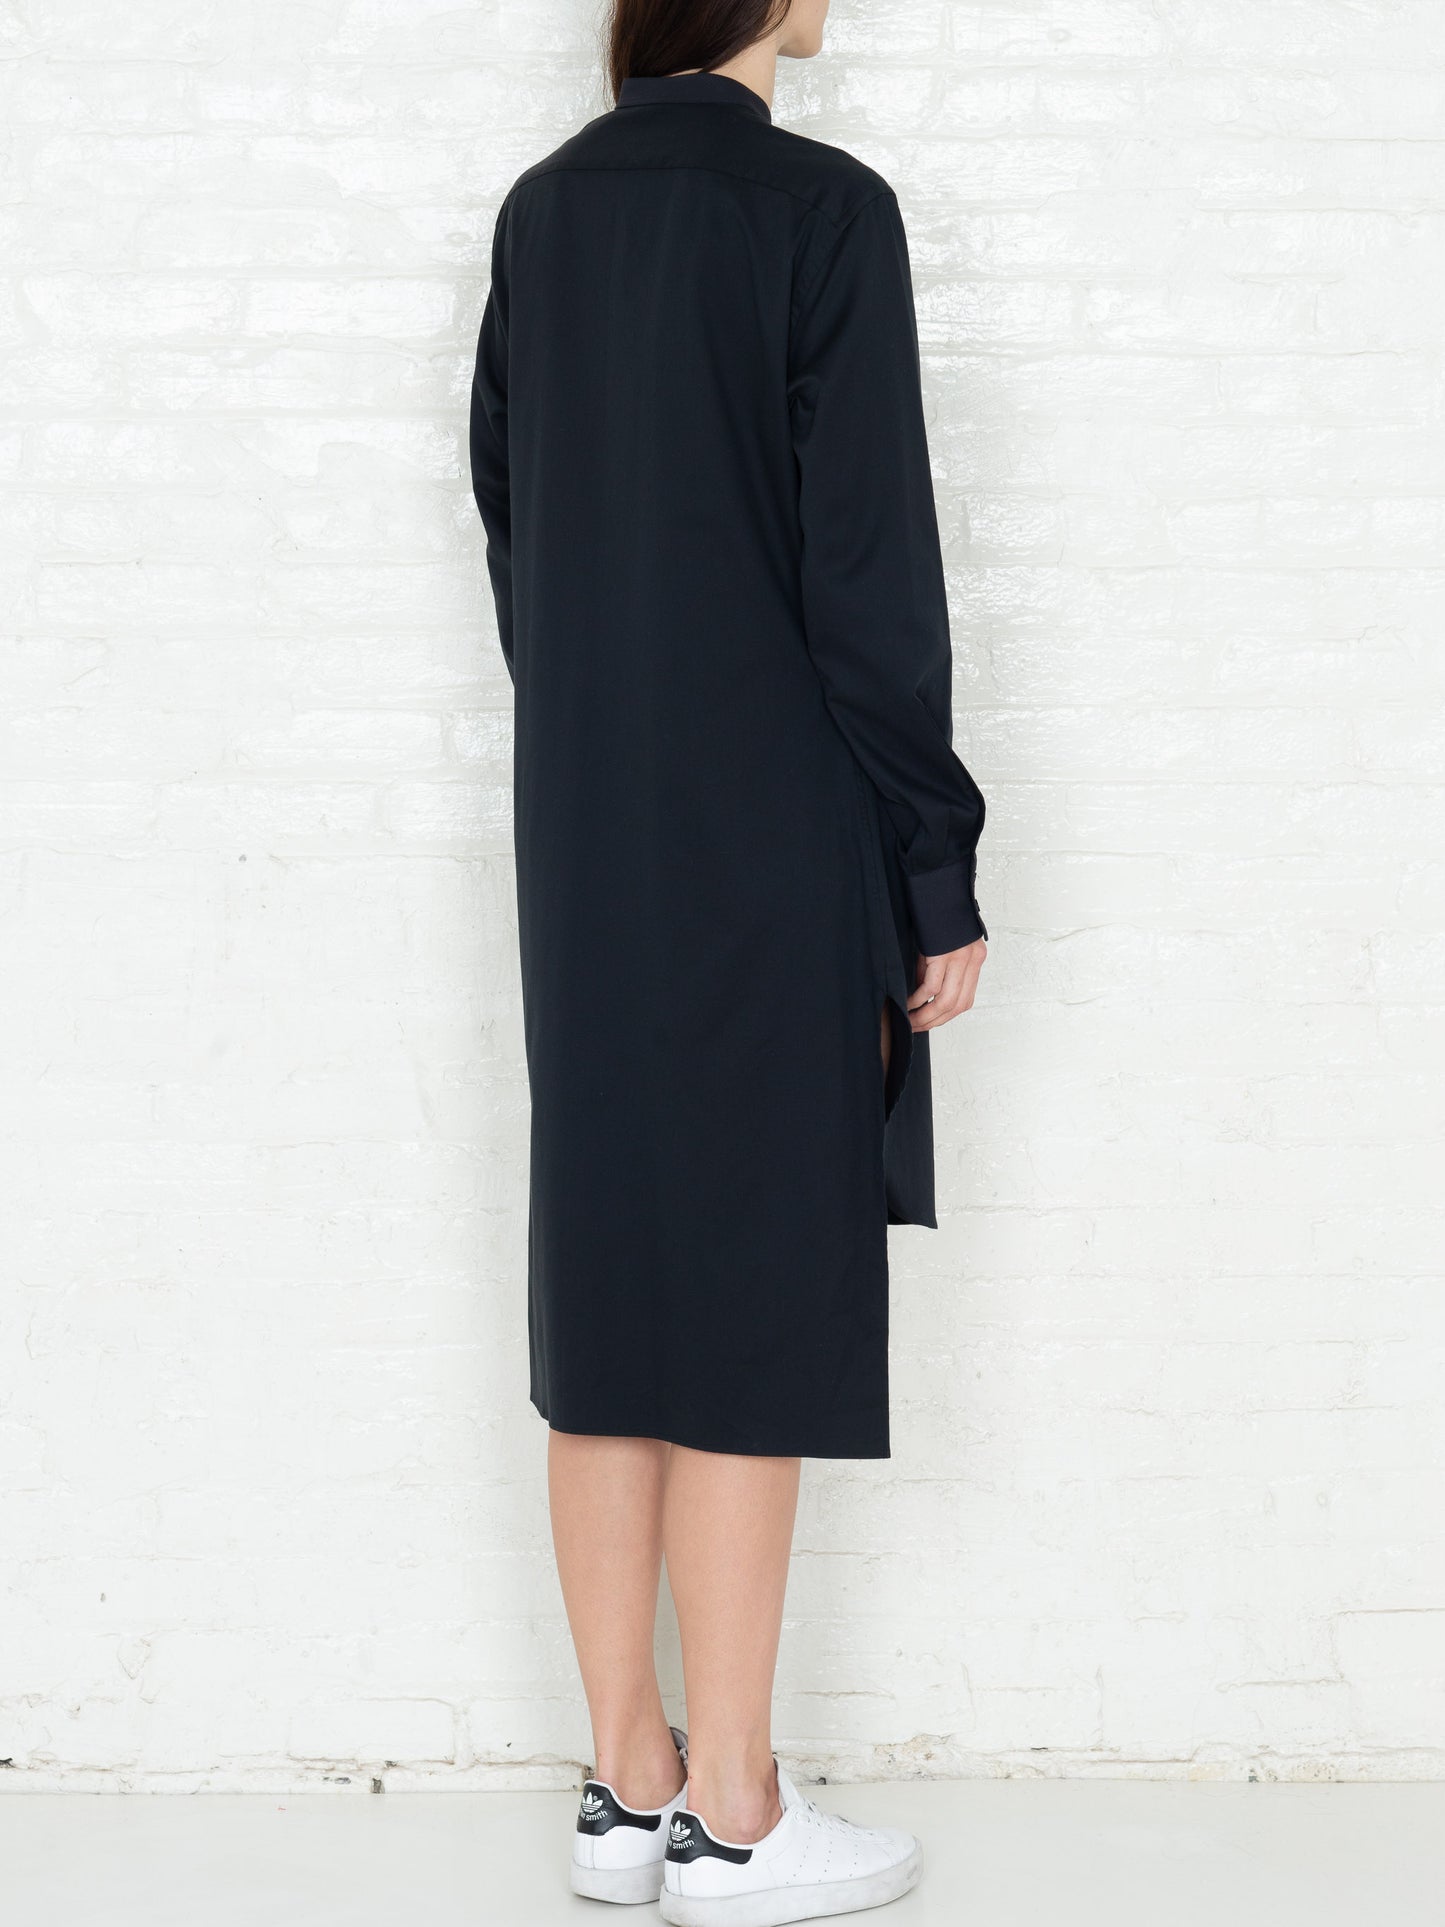 "The Essential" Long Tunic Shirt in Black